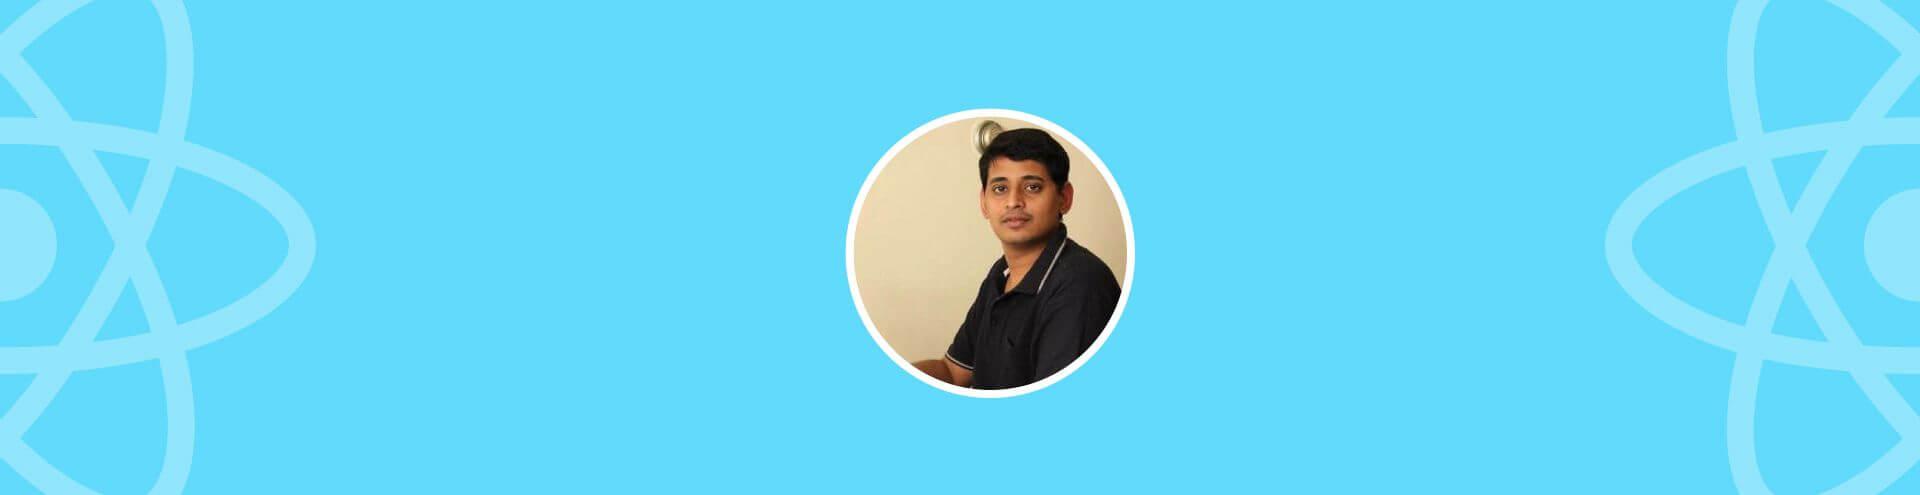 The Future of React Native: Interview with Ram N - a Software Engineer at Facebook